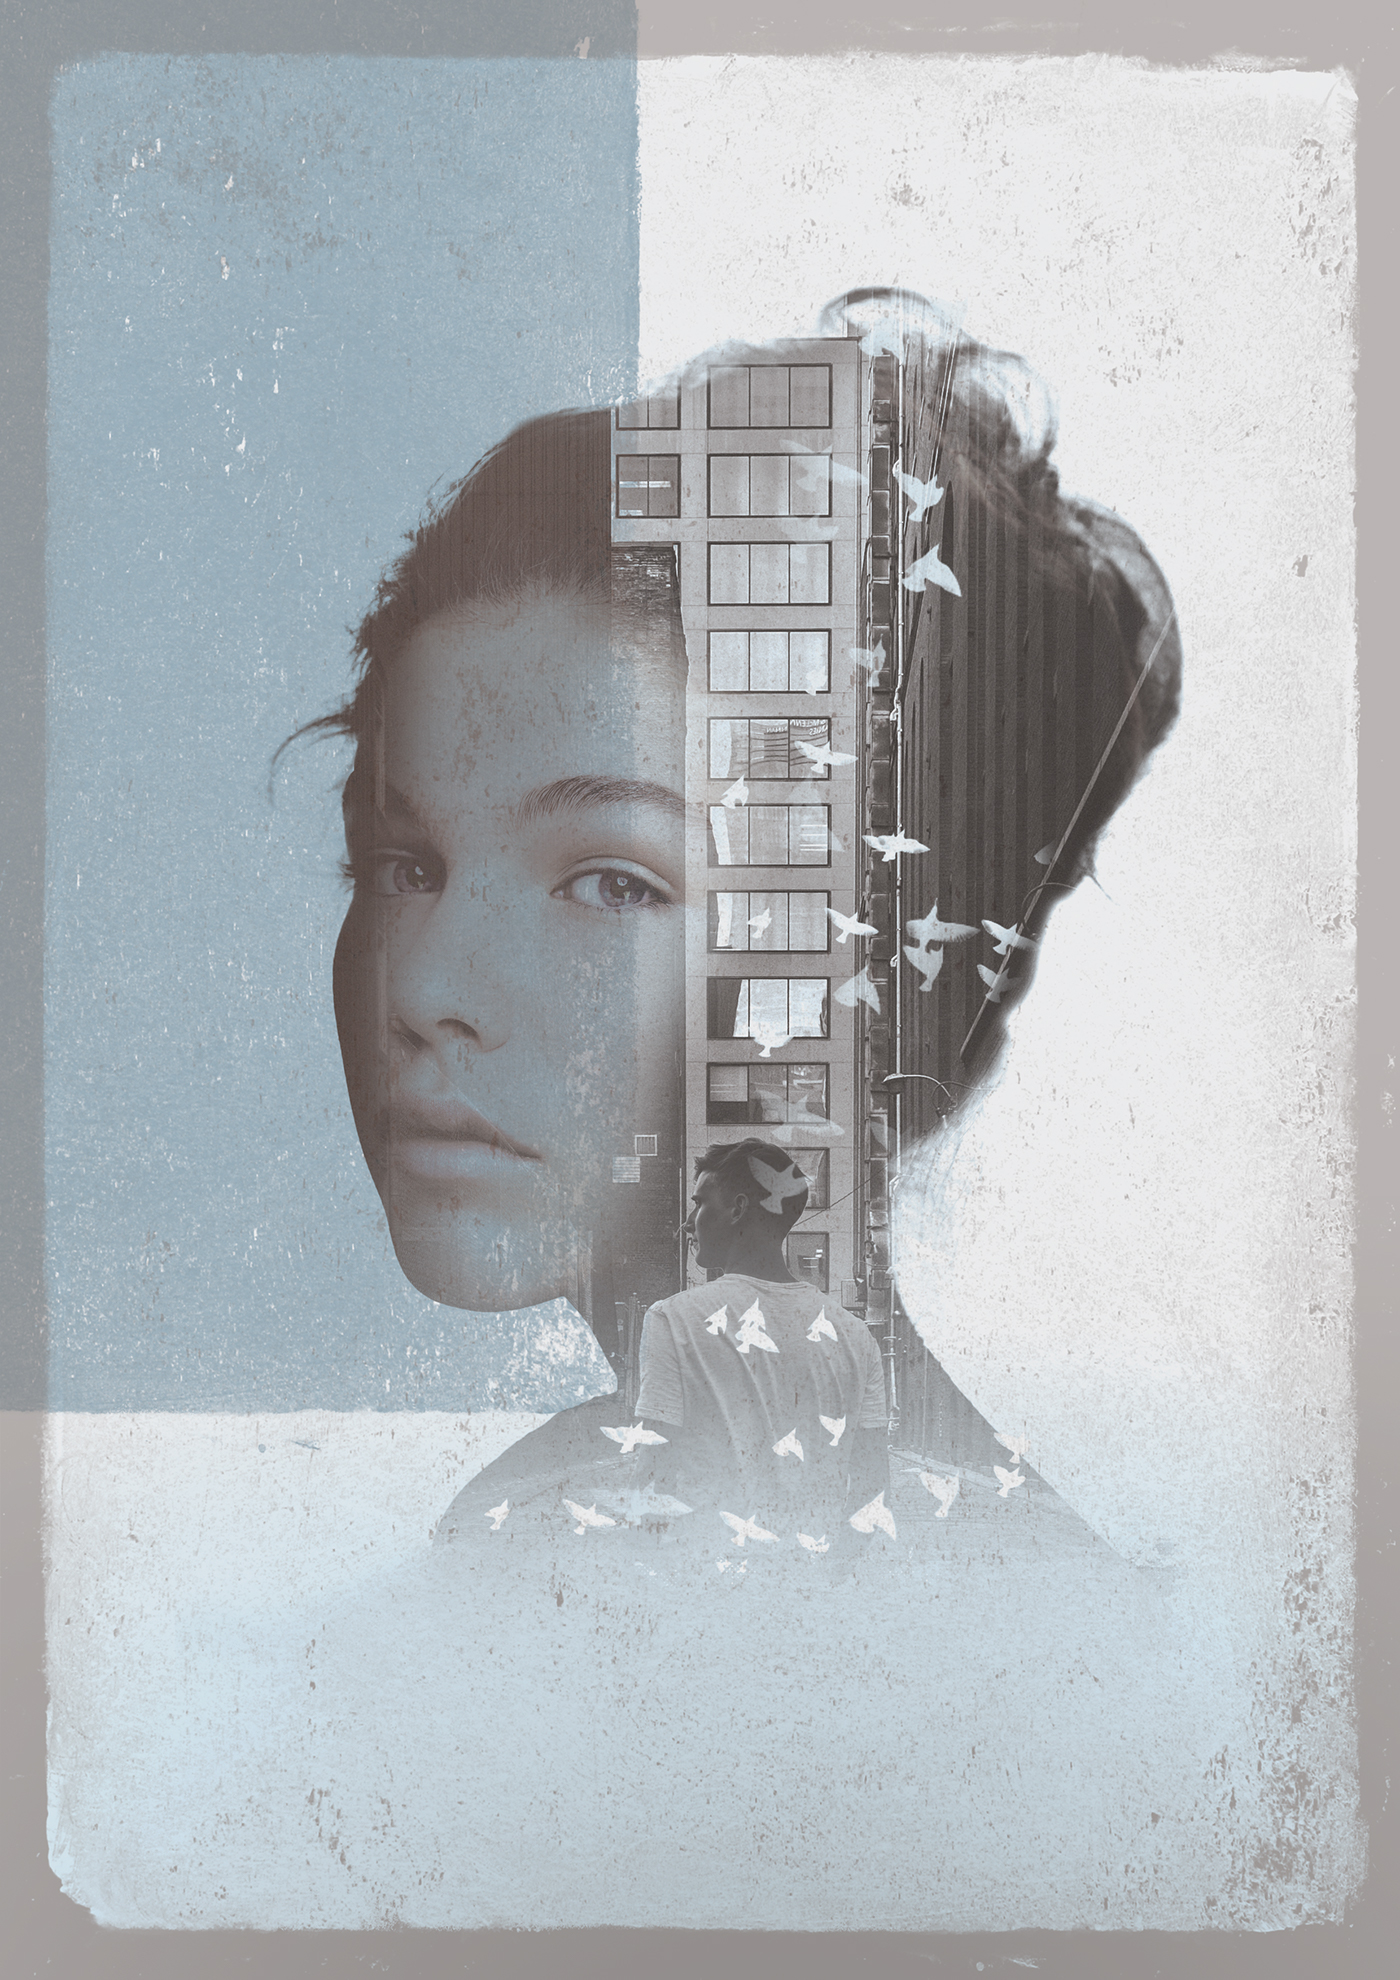 photoshop Love fading leaving yearning hurt textures double exposure